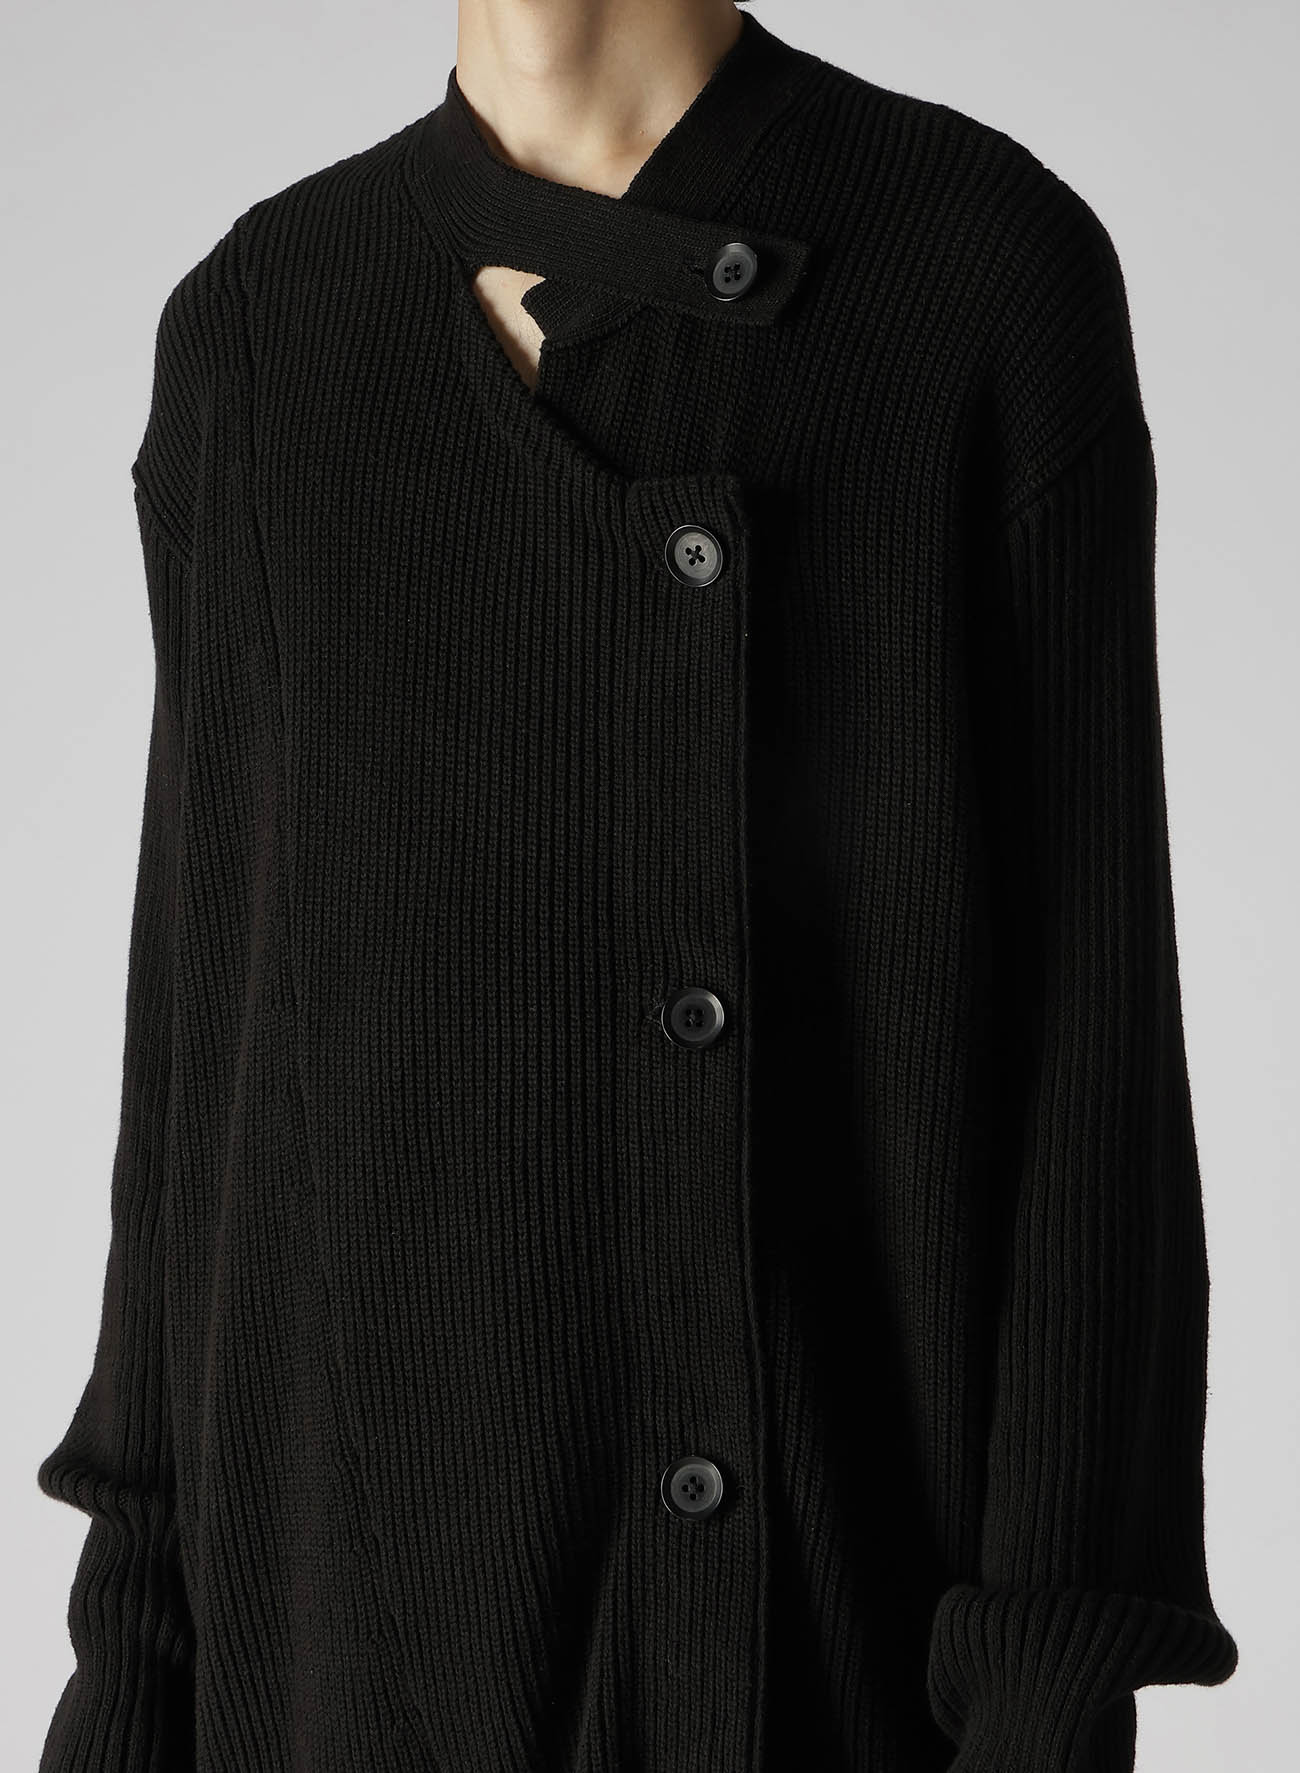 COTTON KNIT DOUBLE FRONT CARDIGAN(FREE SIZE BLACK): GroundY｜THE 